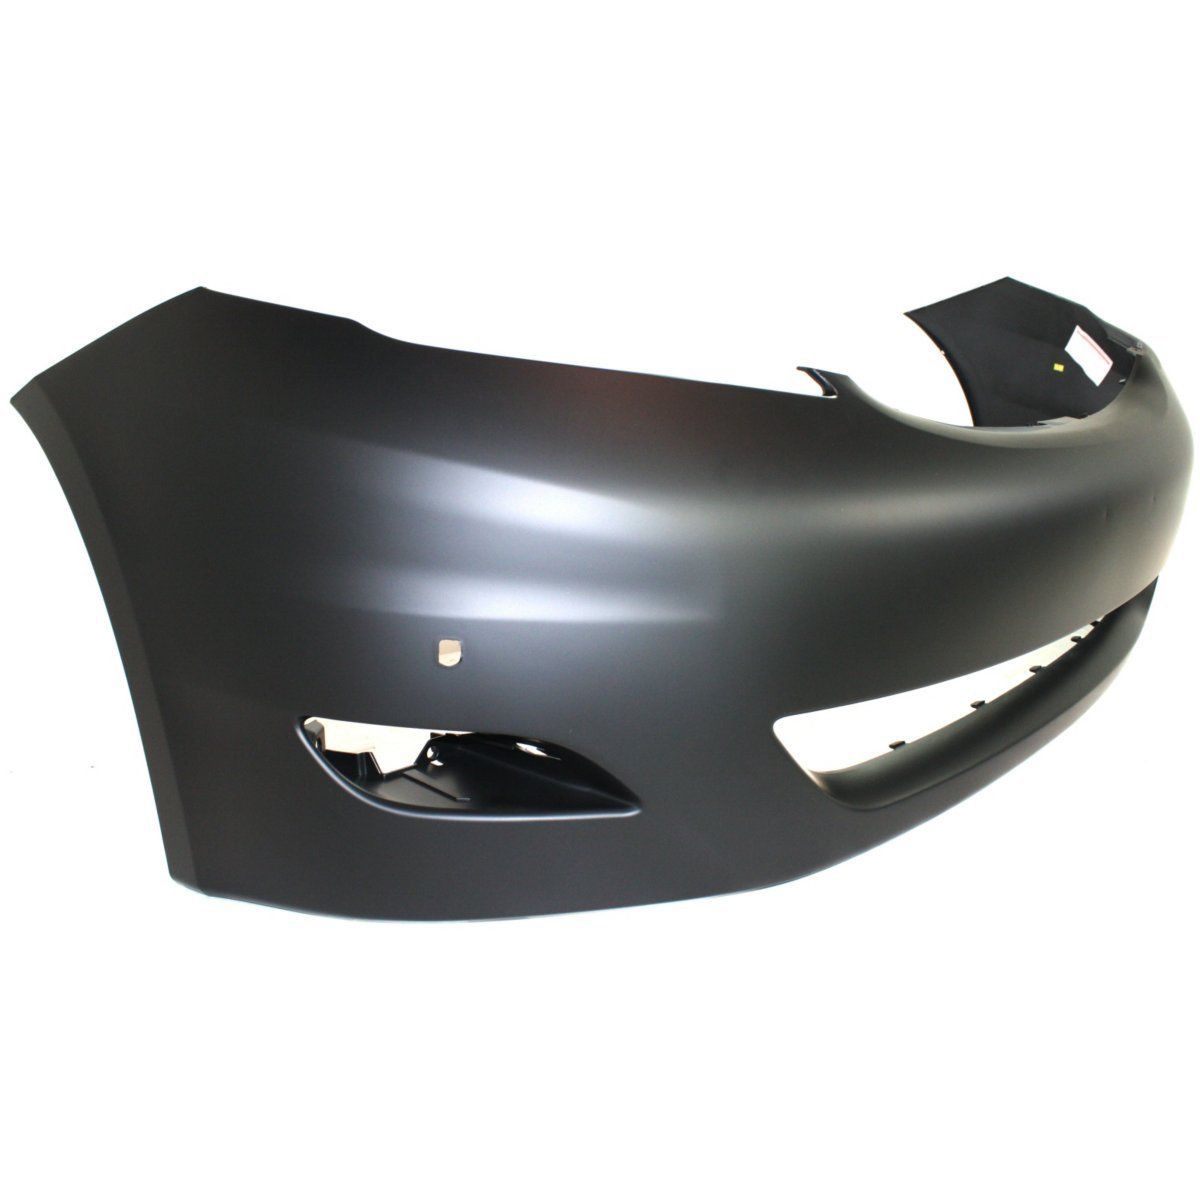 2006-2010 TOYOTA SIENNA Front Bumper Cover w/Park Assist Sensors Painted to Match